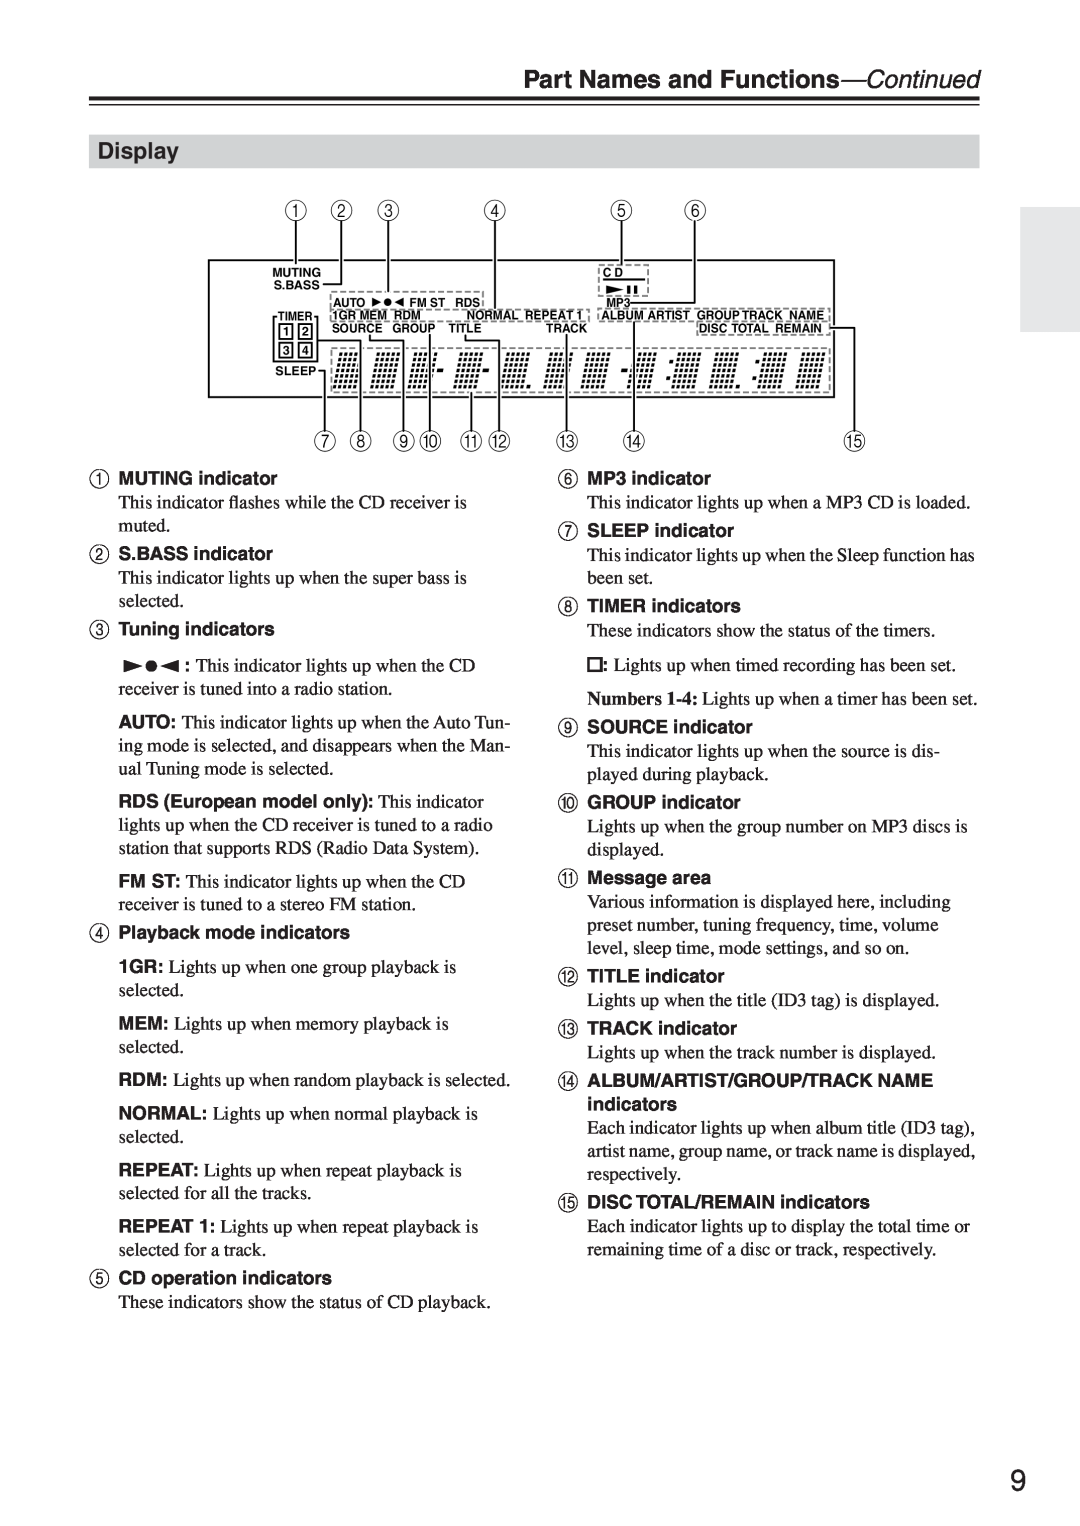 Onkyo CR-N7 instruction manual Part Names and Functions-Continued, Display, 7 8 9J K L 